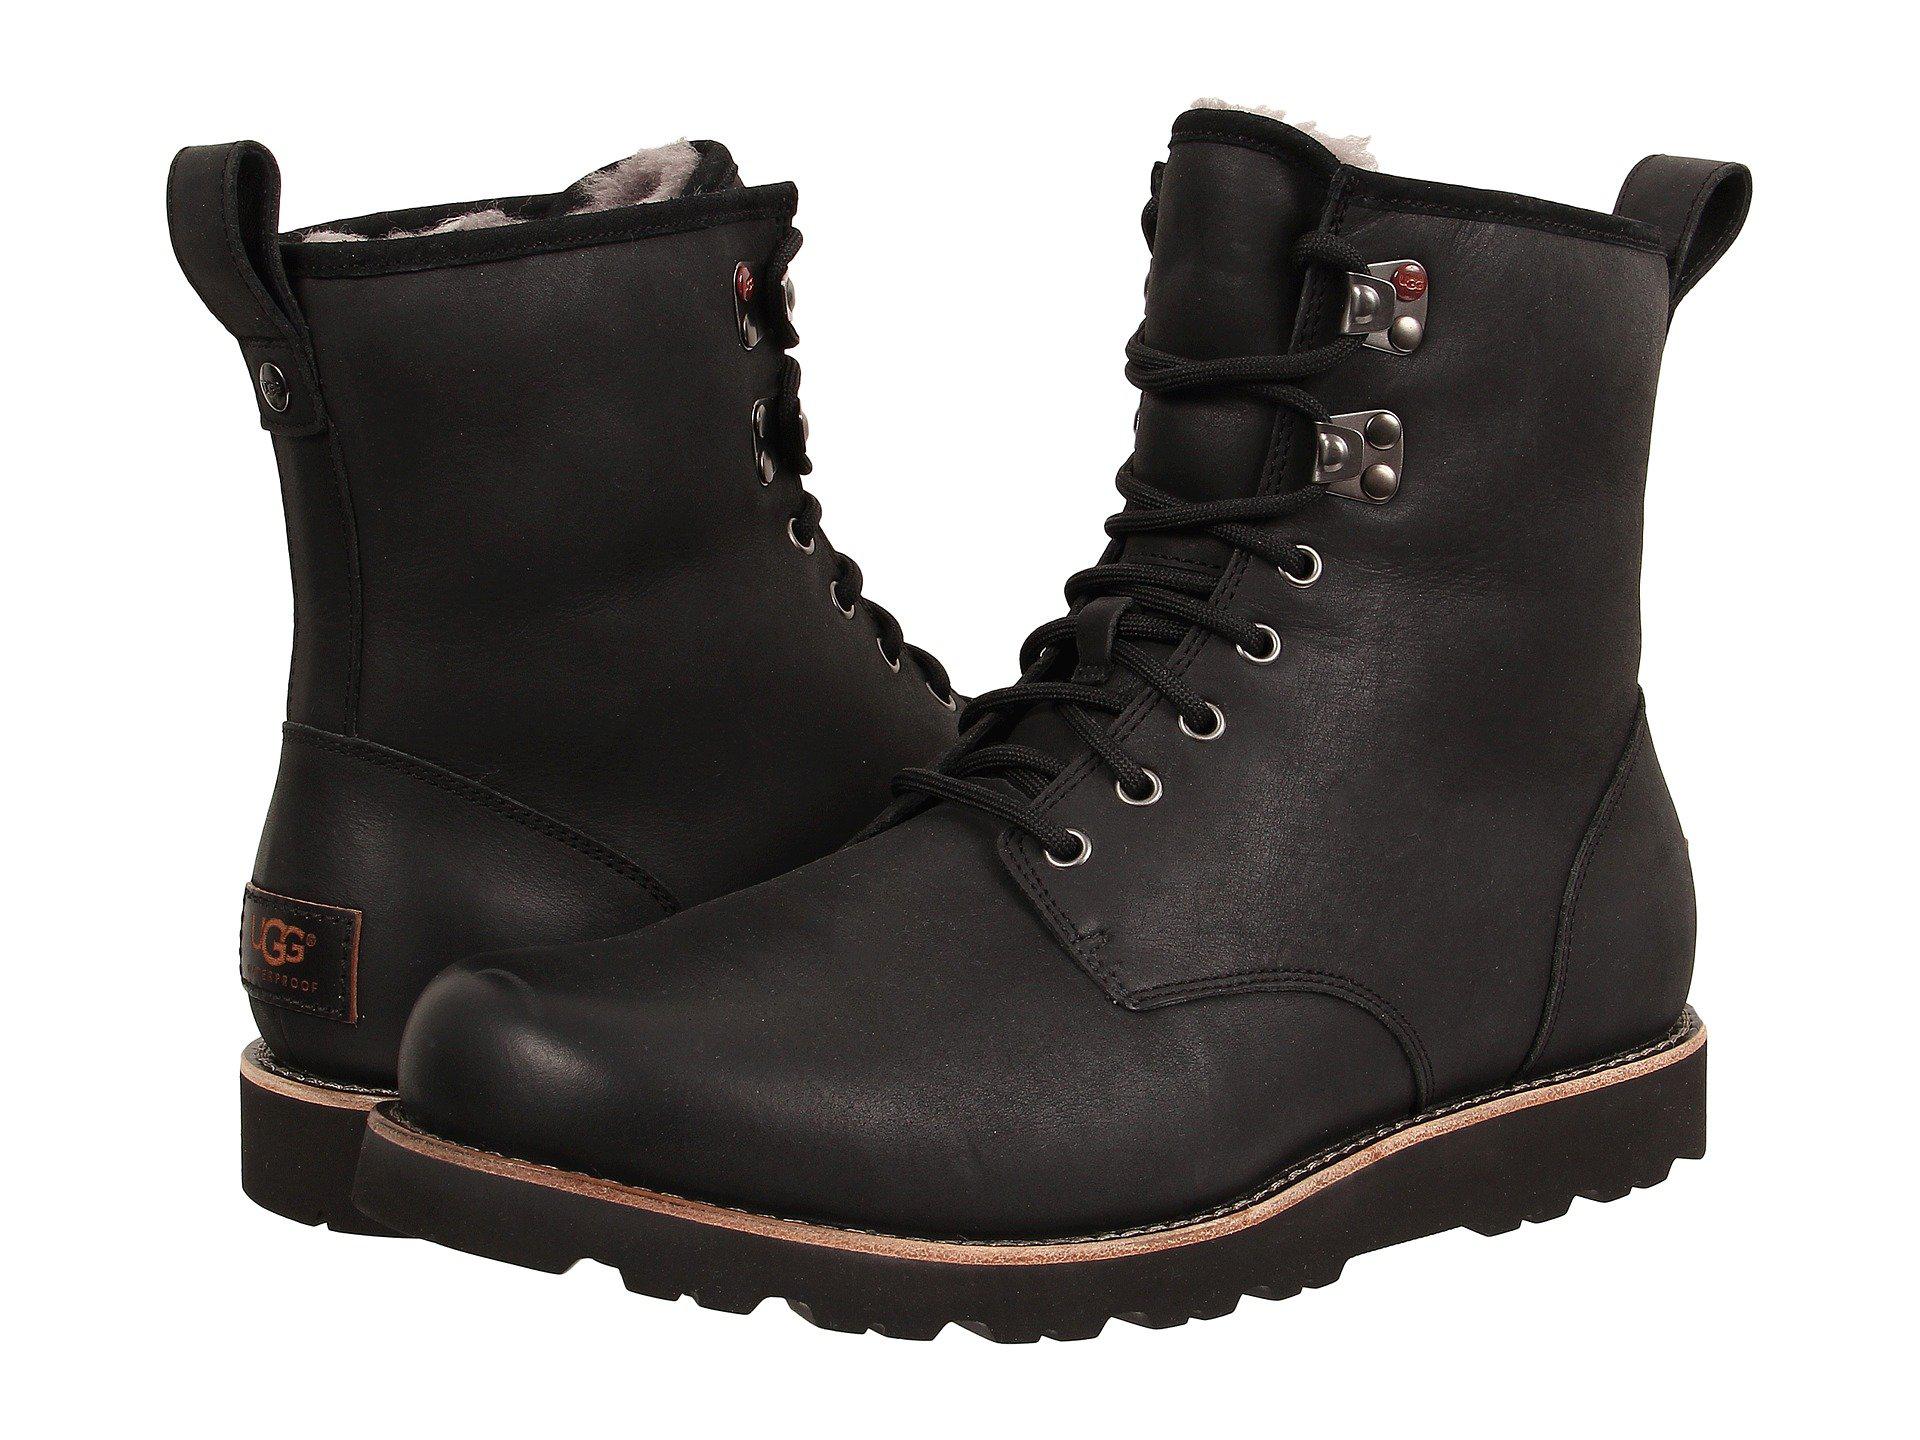 Lyst - Ugg Hannen Tl (black Leather) Men's Lace-up Boots in Metallic ...